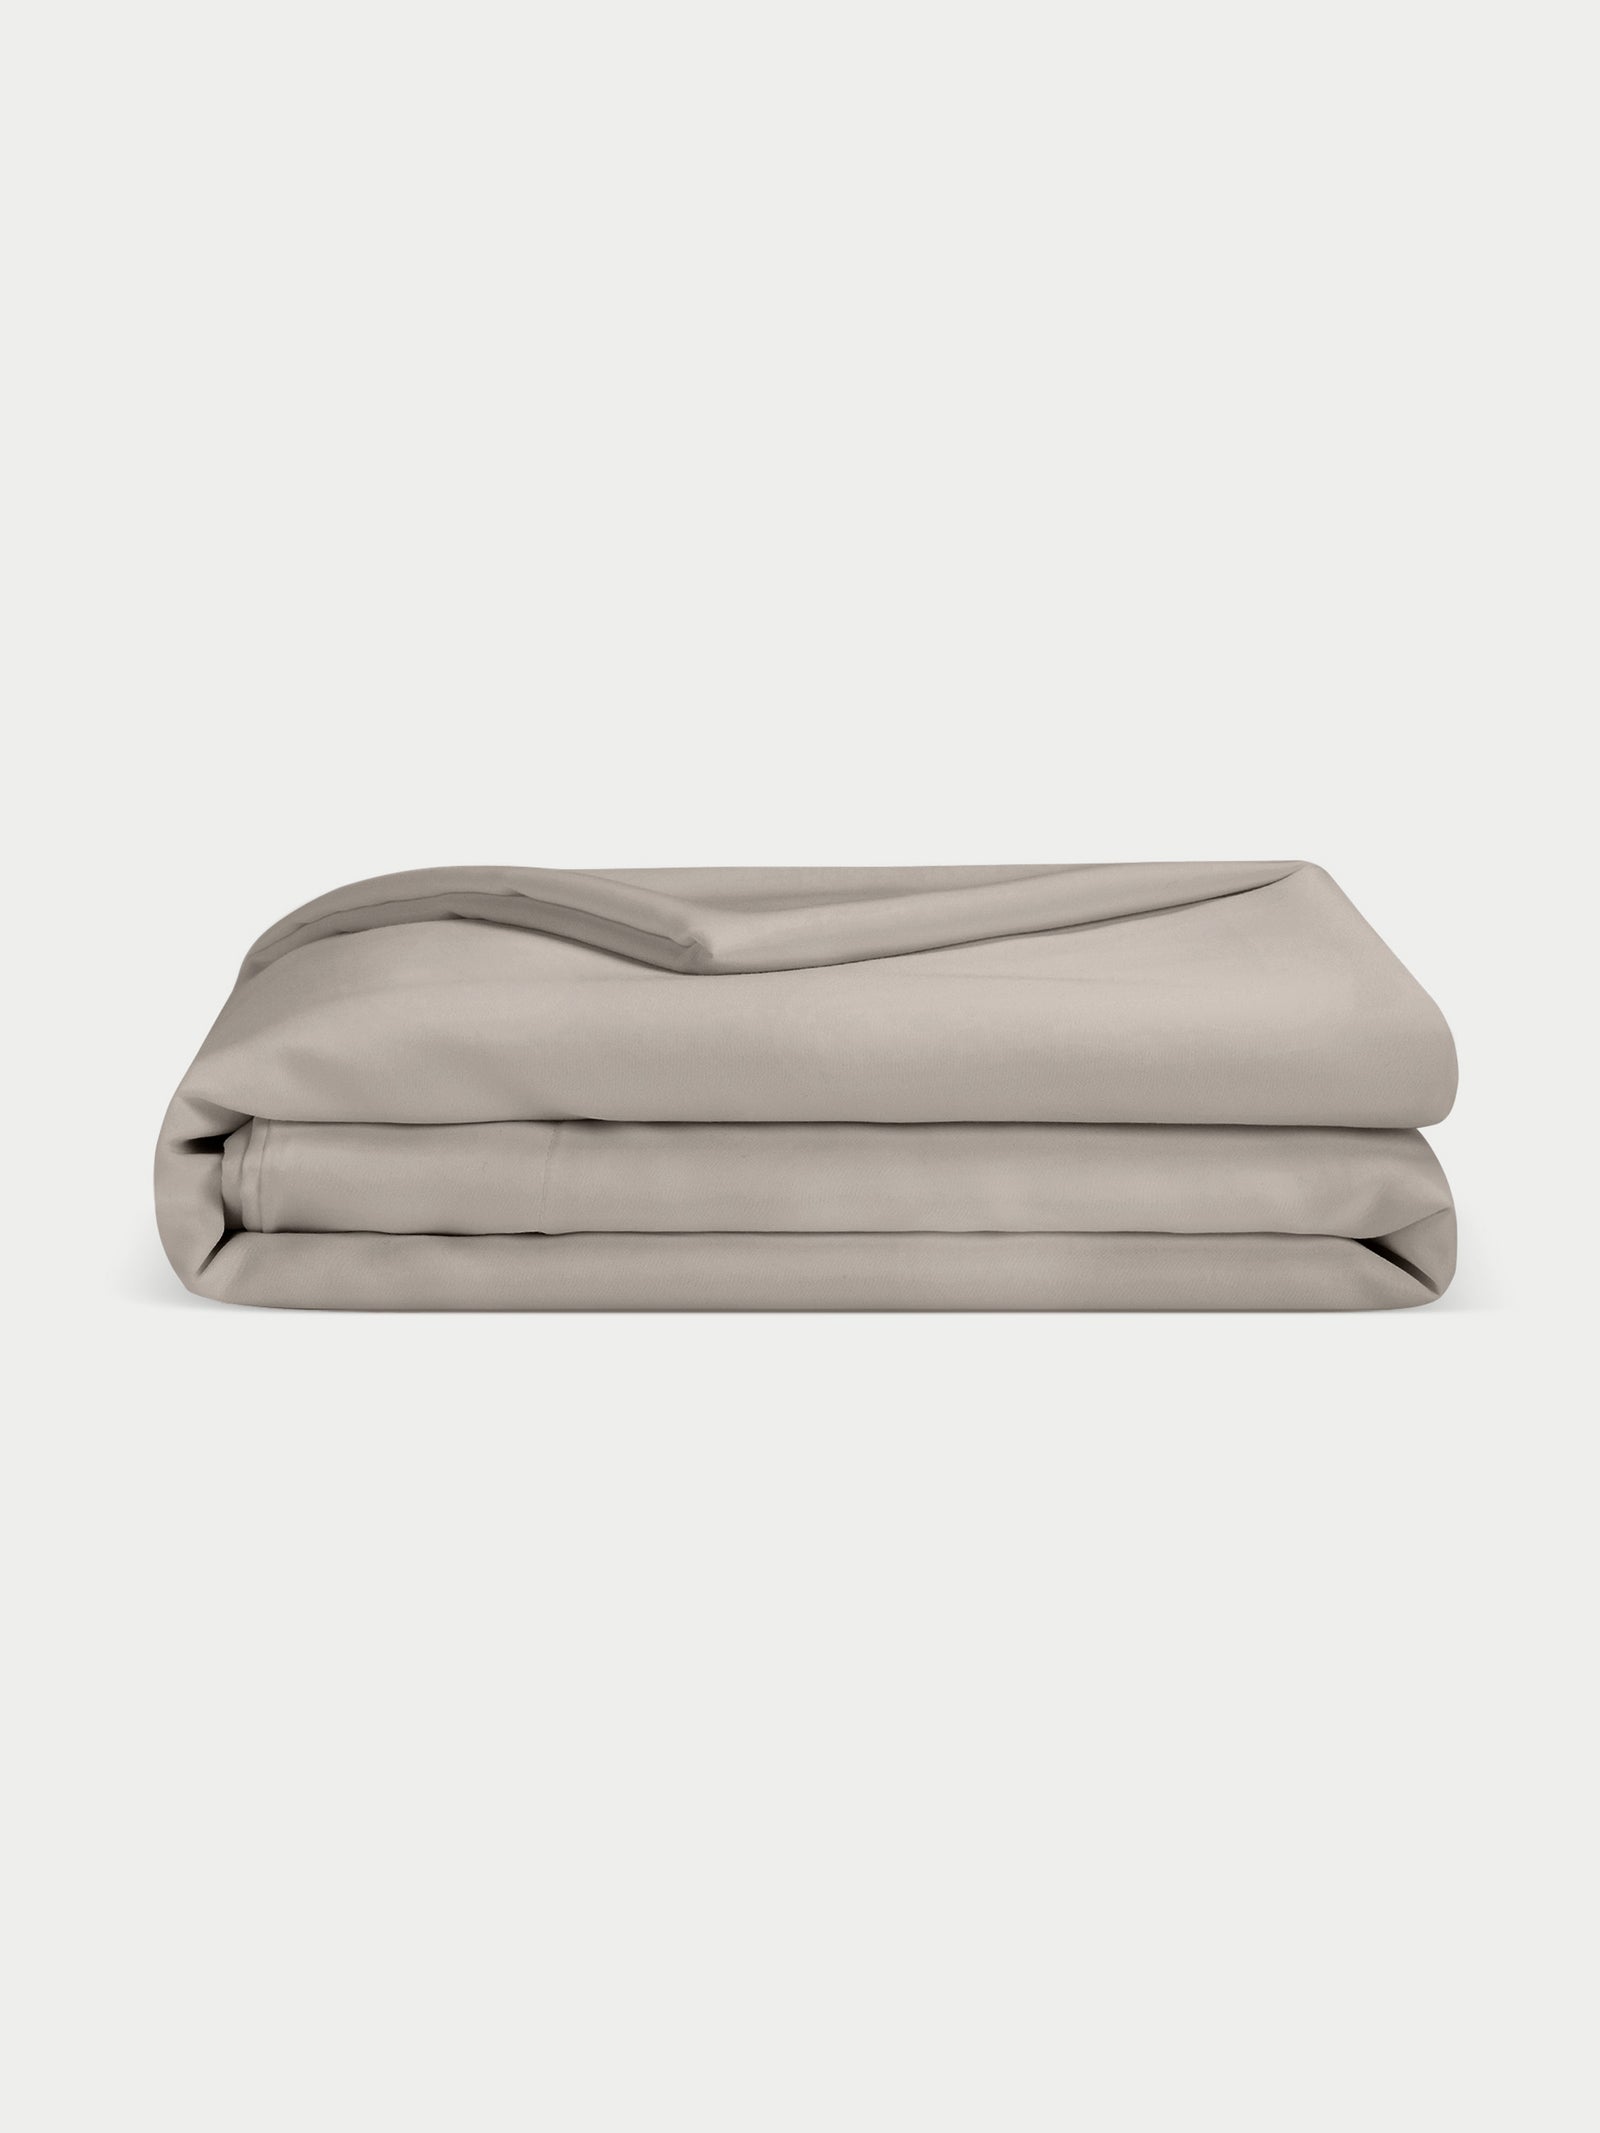 Dove Grey duvet cover folded with white background 